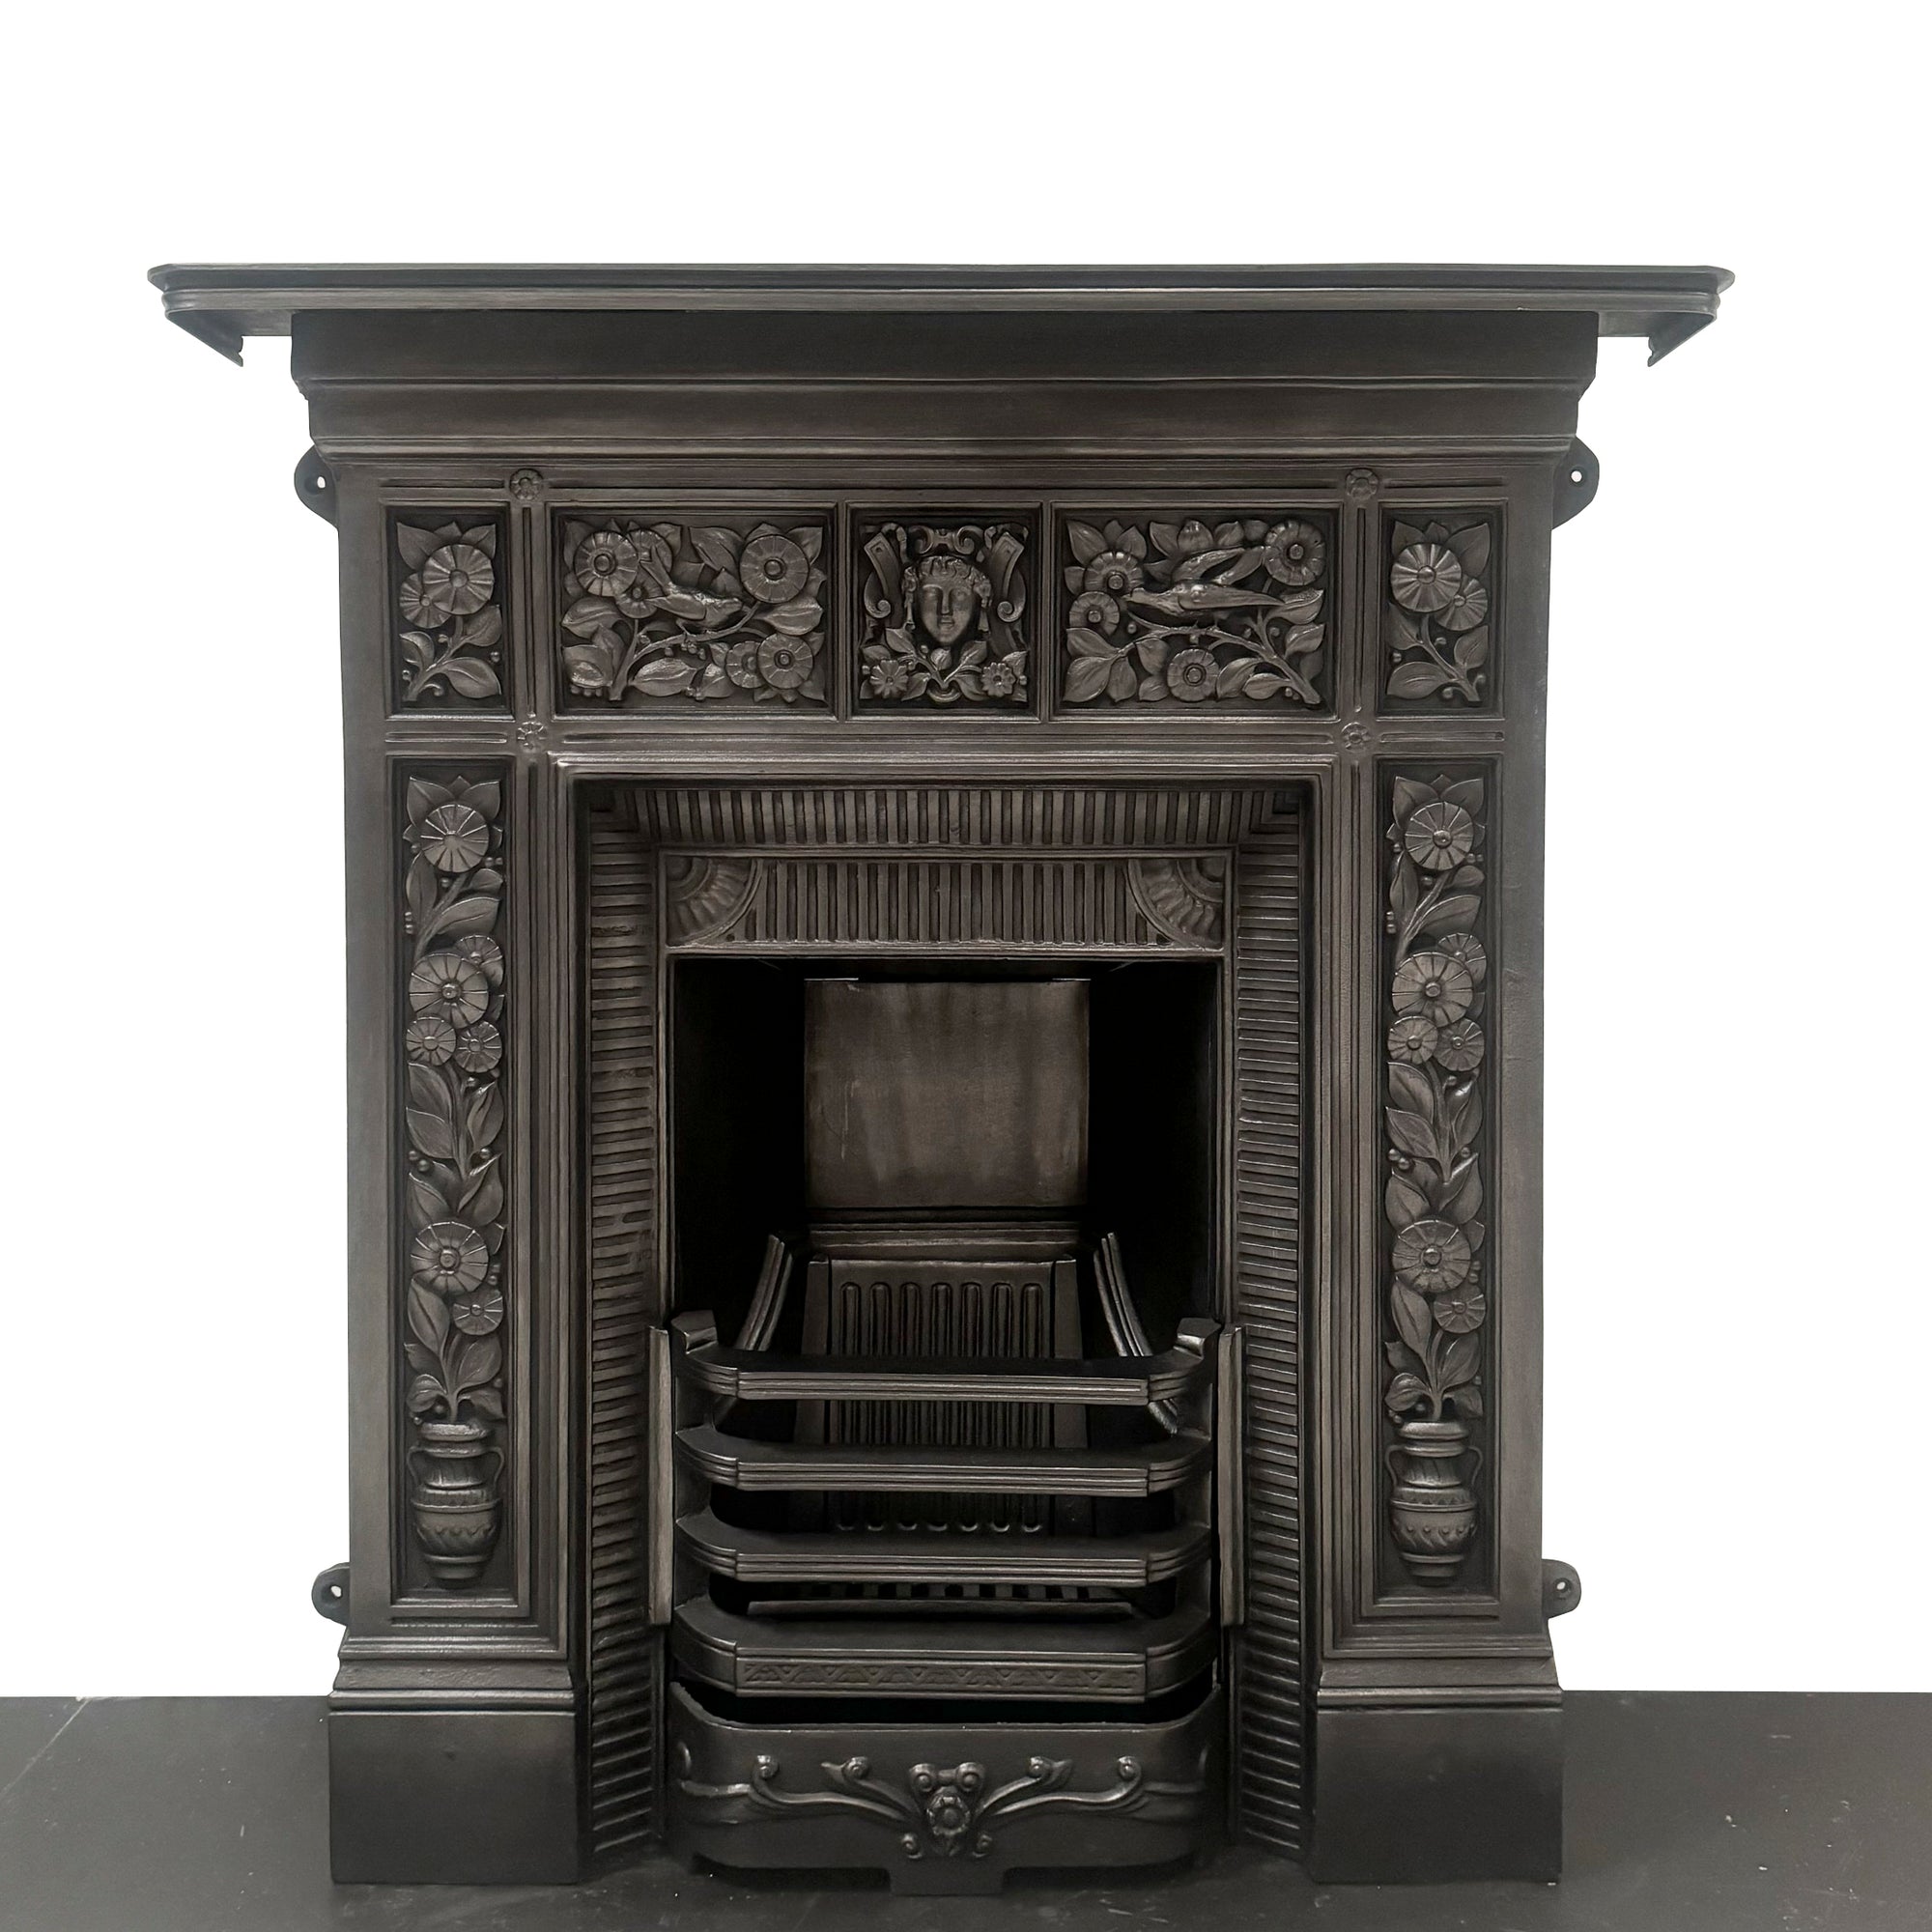 Reclaimed Victorian Style Cast Iron Combination Fireplace | The Architectural Forum